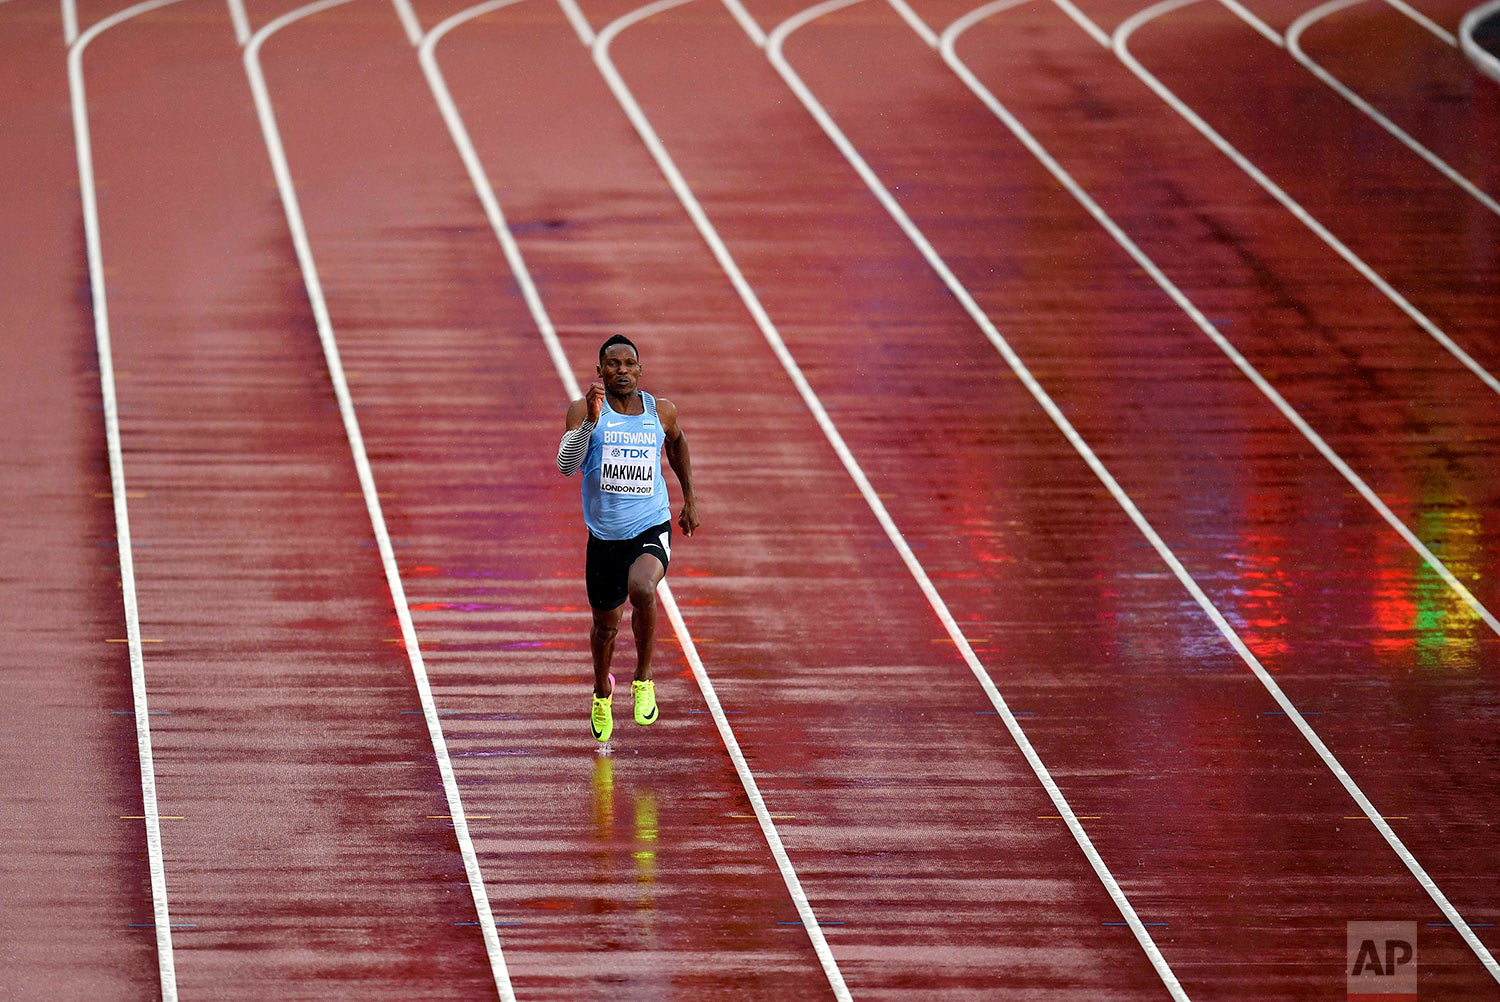  Botswana's Isaac Makwala runs a men's 200-meter individual time trial during the World Athletics Championships in London Wednesday, Aug. 9, 2017. Makwala ran to qualify for the 200m semi-finals after he missed the 200m heats and the 400m final as he